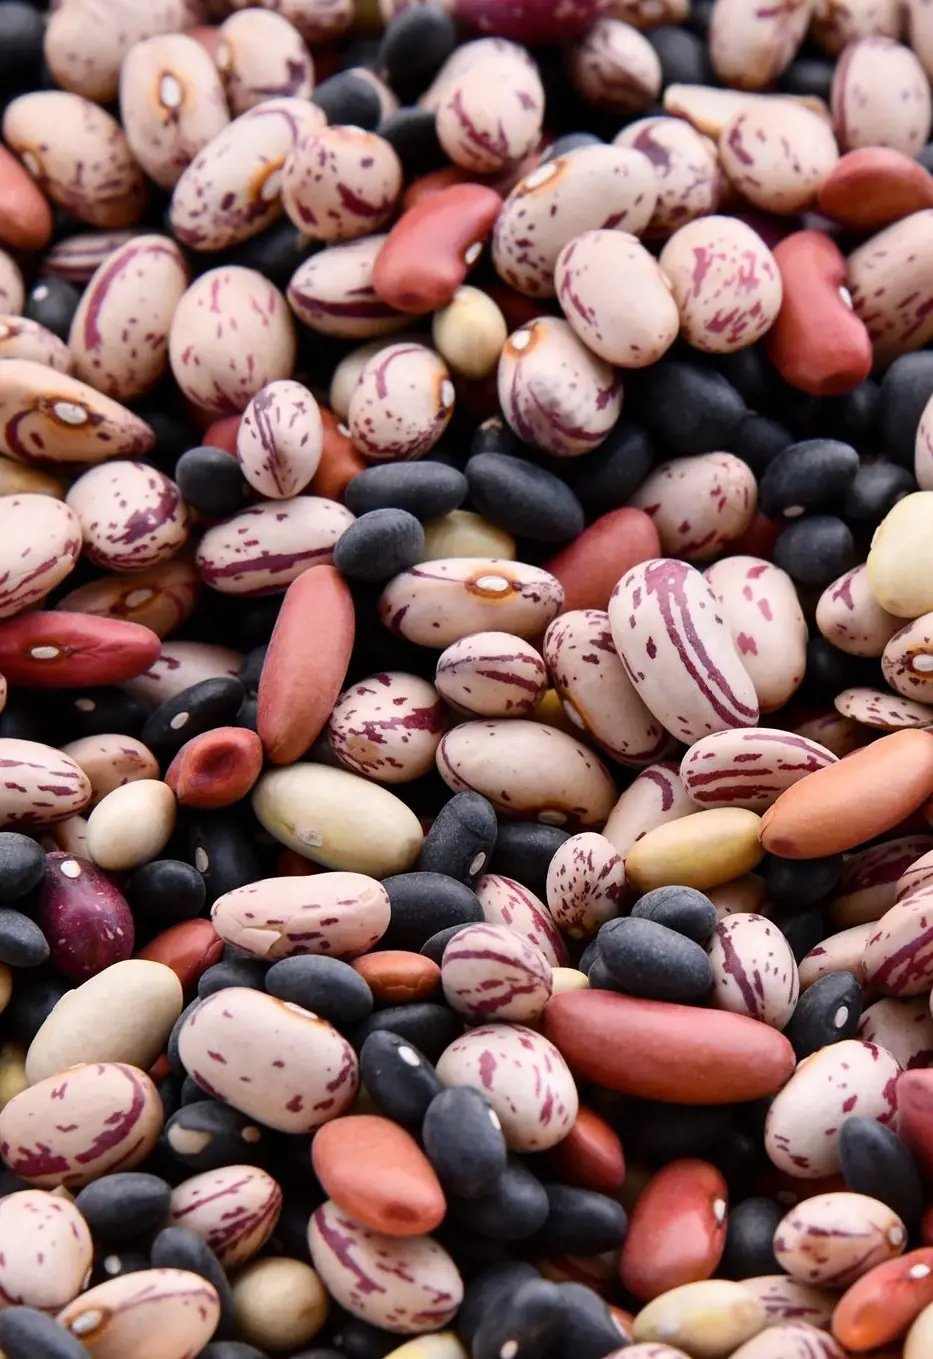 Legumes are packed with nutrients and play a role in controlling and managing various diseases, per Invigorate Healthily.